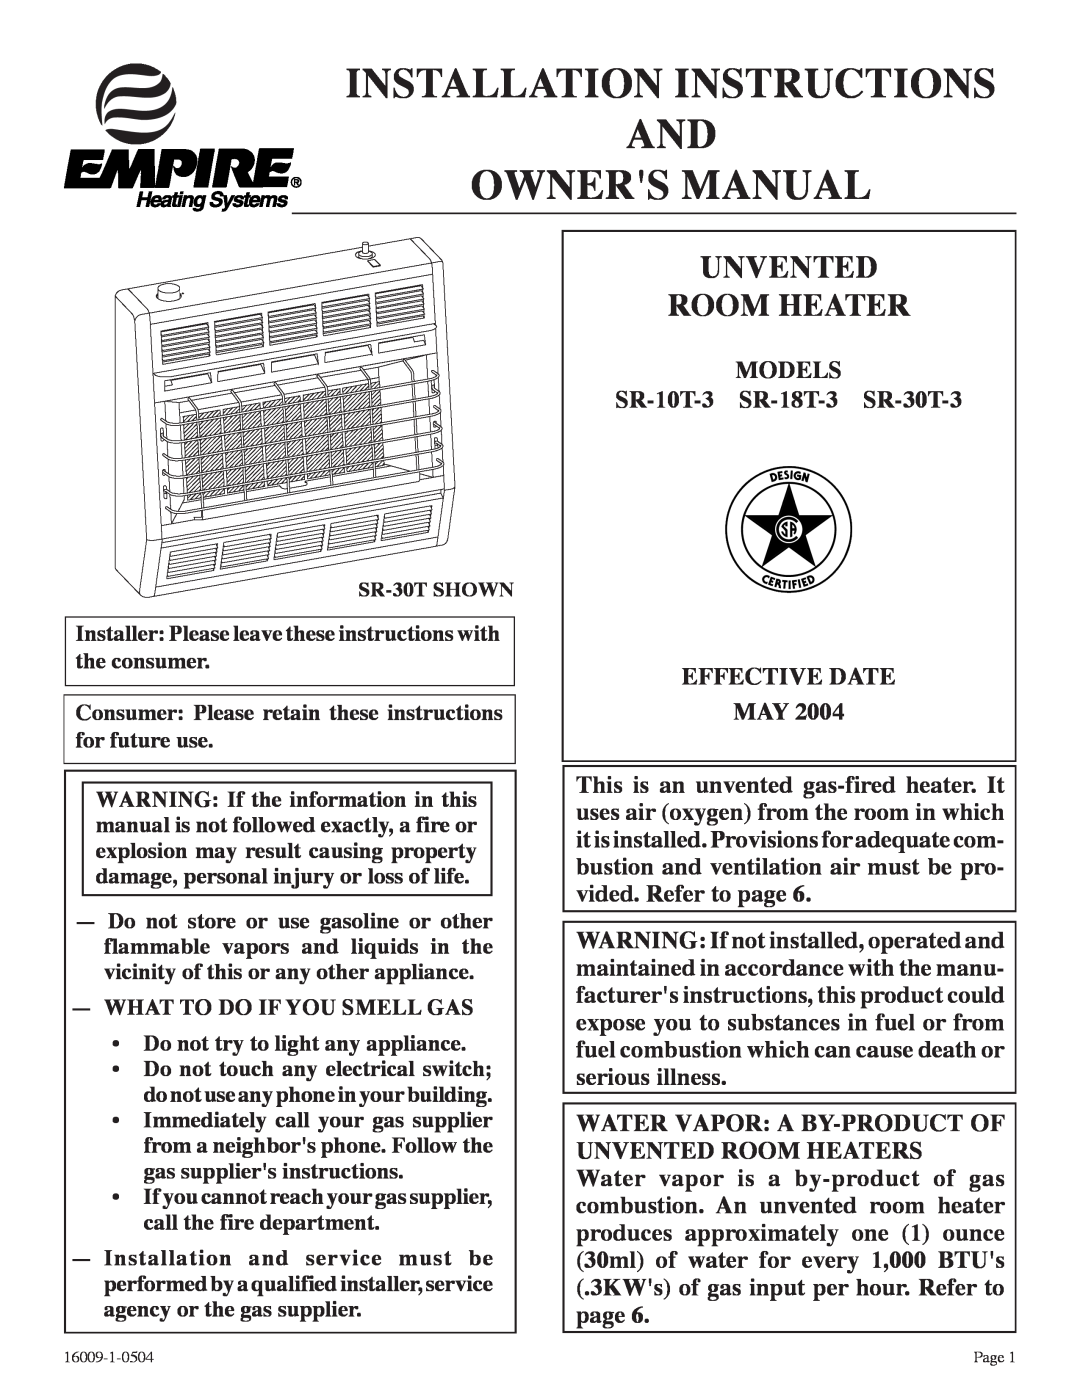 Empire Products SR-30T-3, SR-18T-3, SR-10T-3 installation instructions Unvented Room Heater 